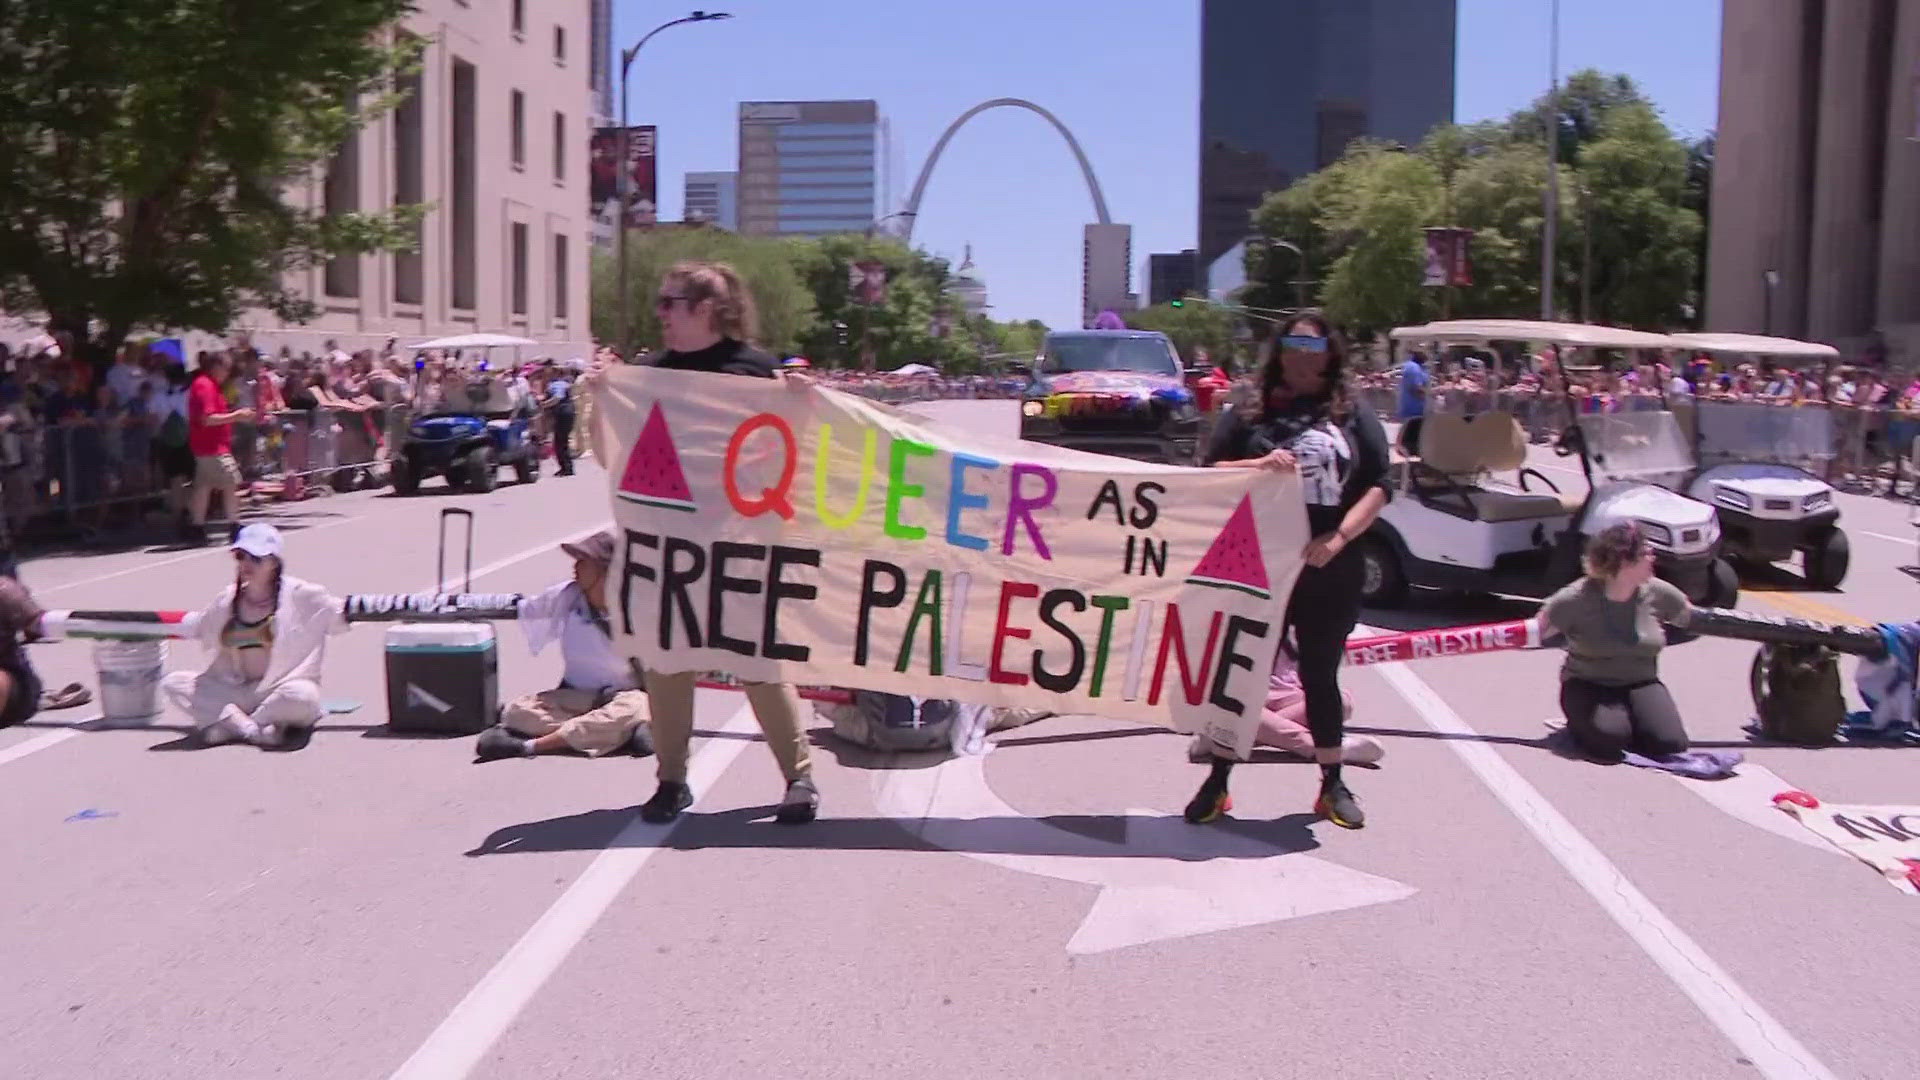 Nearly two dozen pro-Palestinian protesters were arrested Sunday in downtown St. Louis. Those protesters are now out of jail.